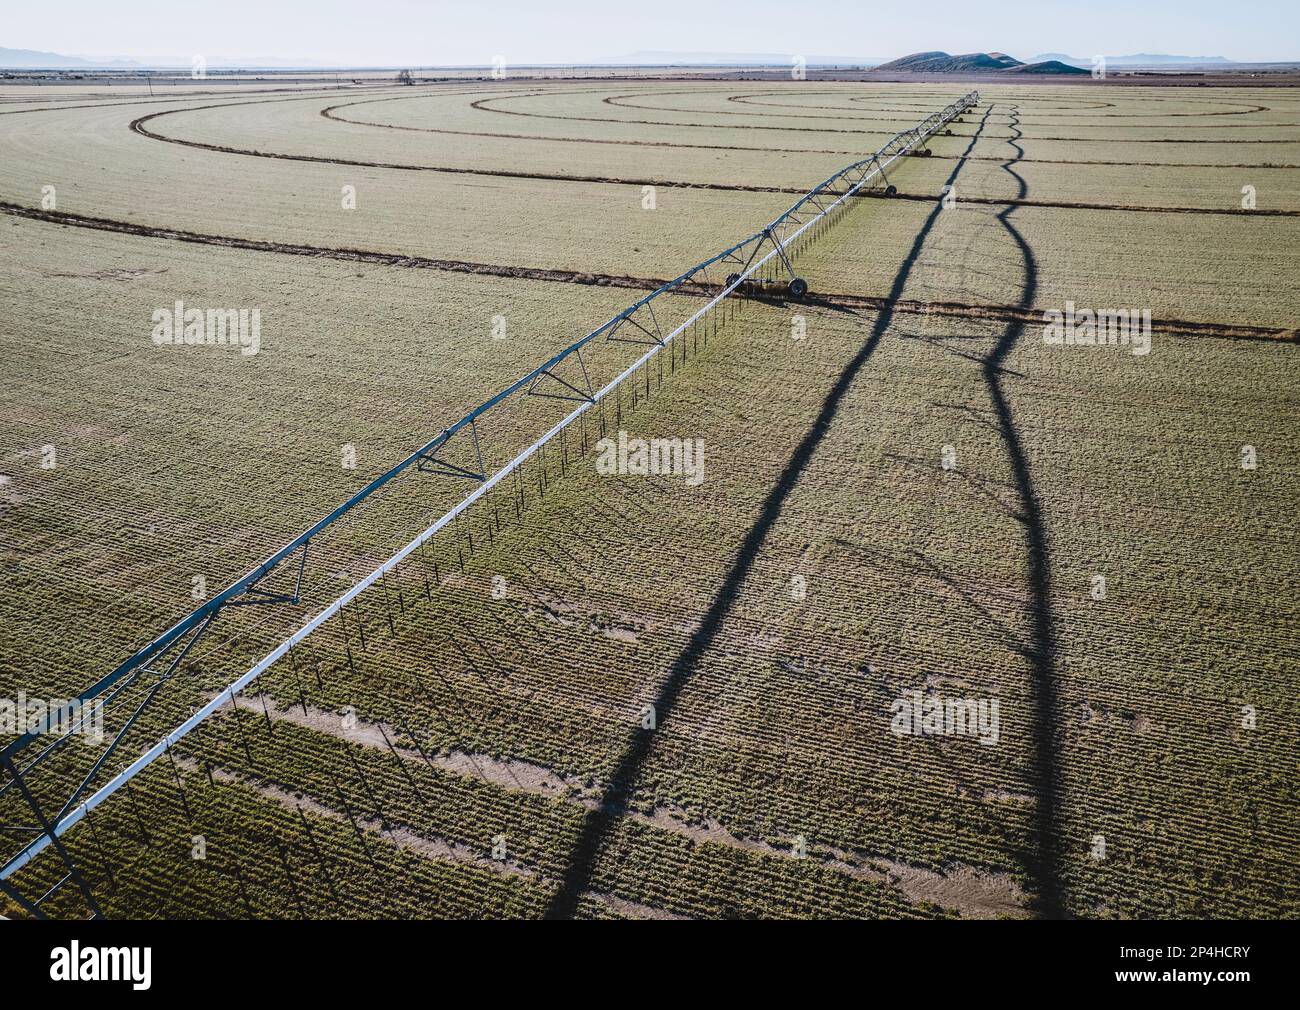 Aerial view agricultural farmland with irrigation, Dell City, Texas Stock Photo